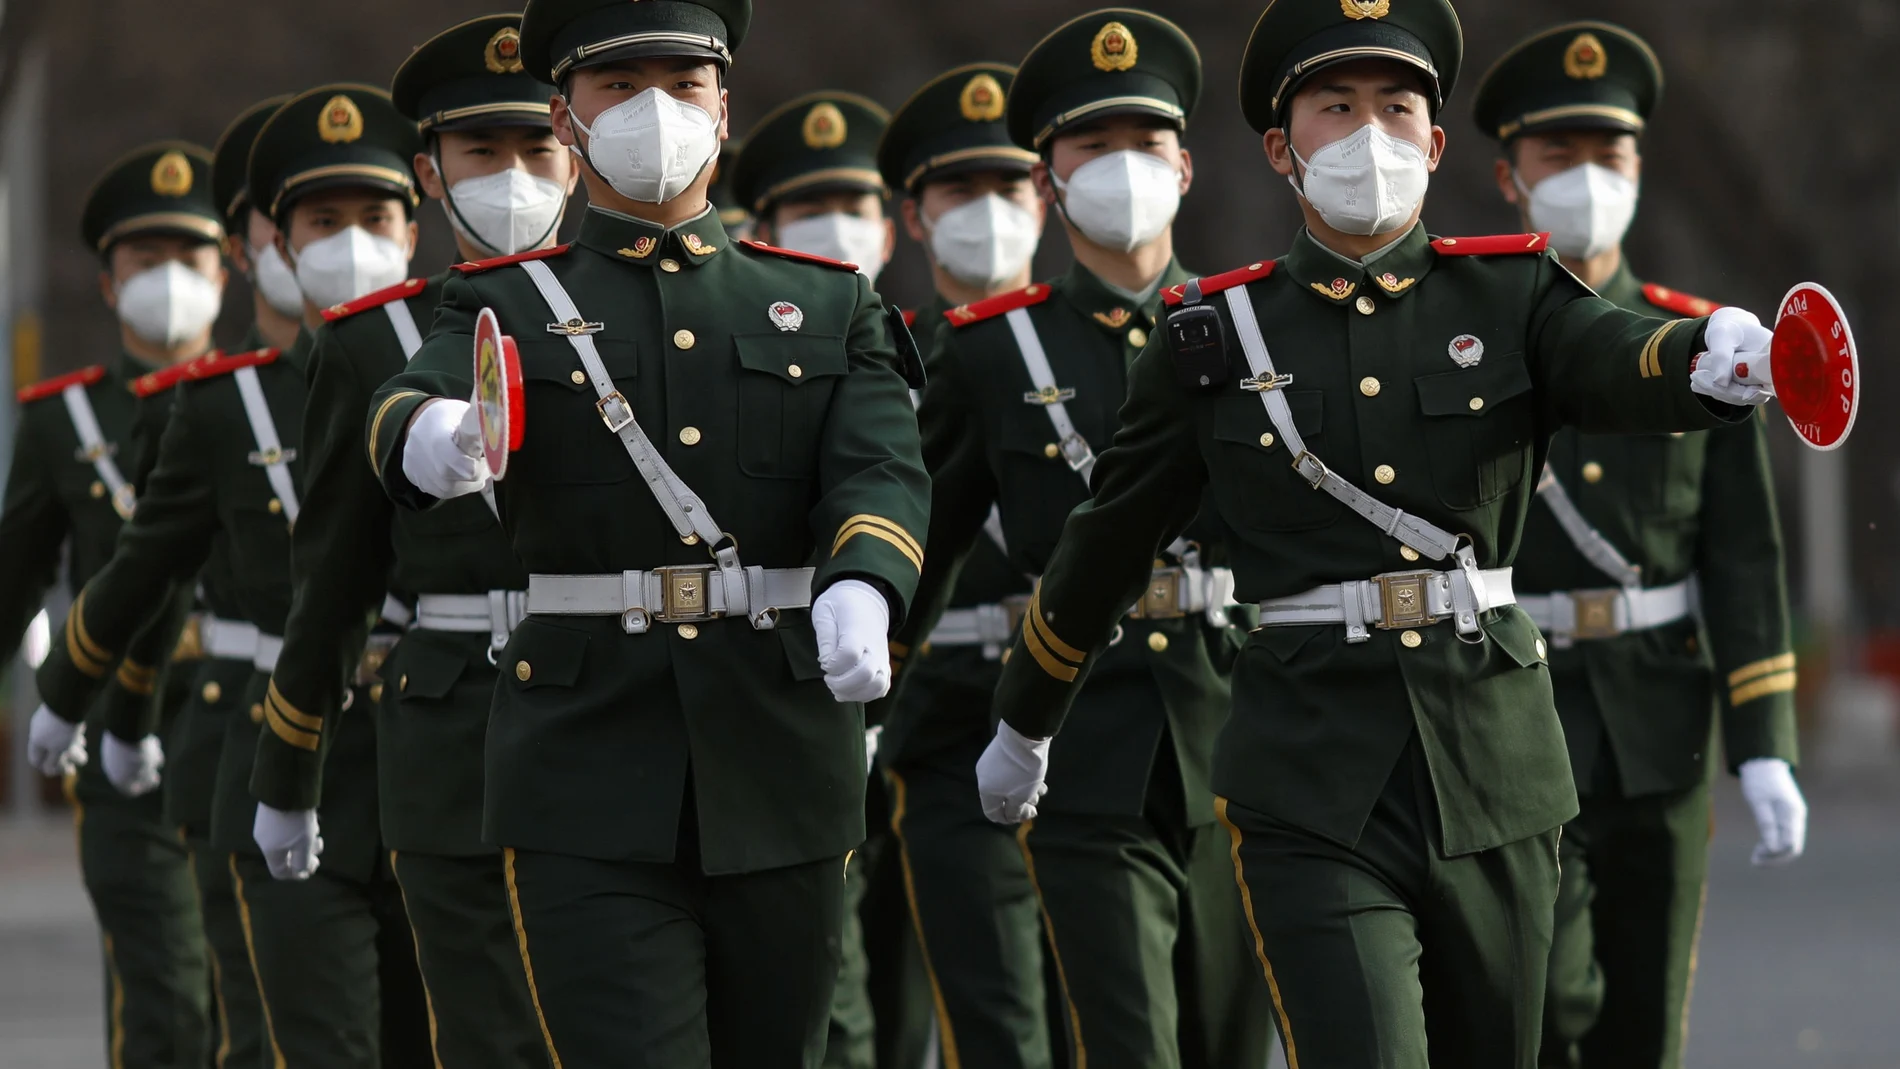 Paramilitary officers wearing face masks to contain the spread of coronavirus disease (COVID-19) walk along a street in Beijing